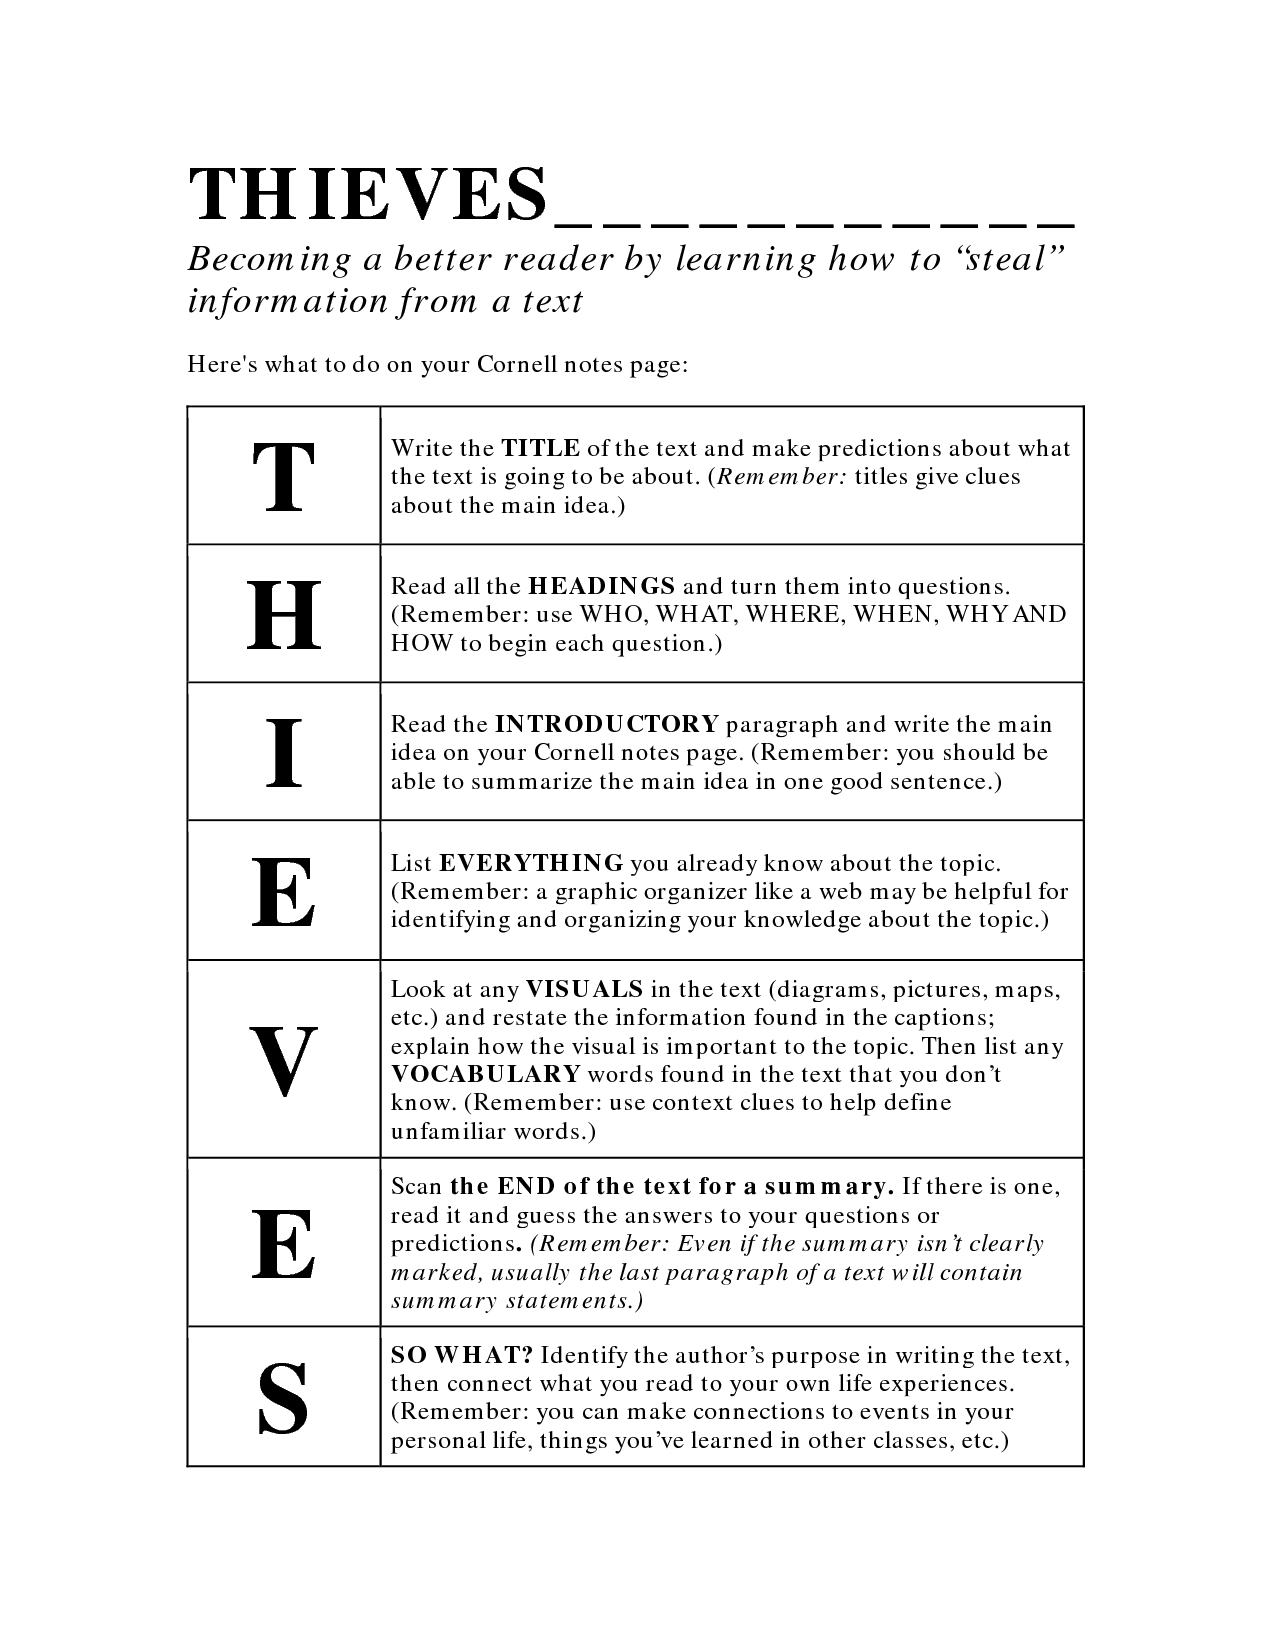 Thieves Reading Strategy